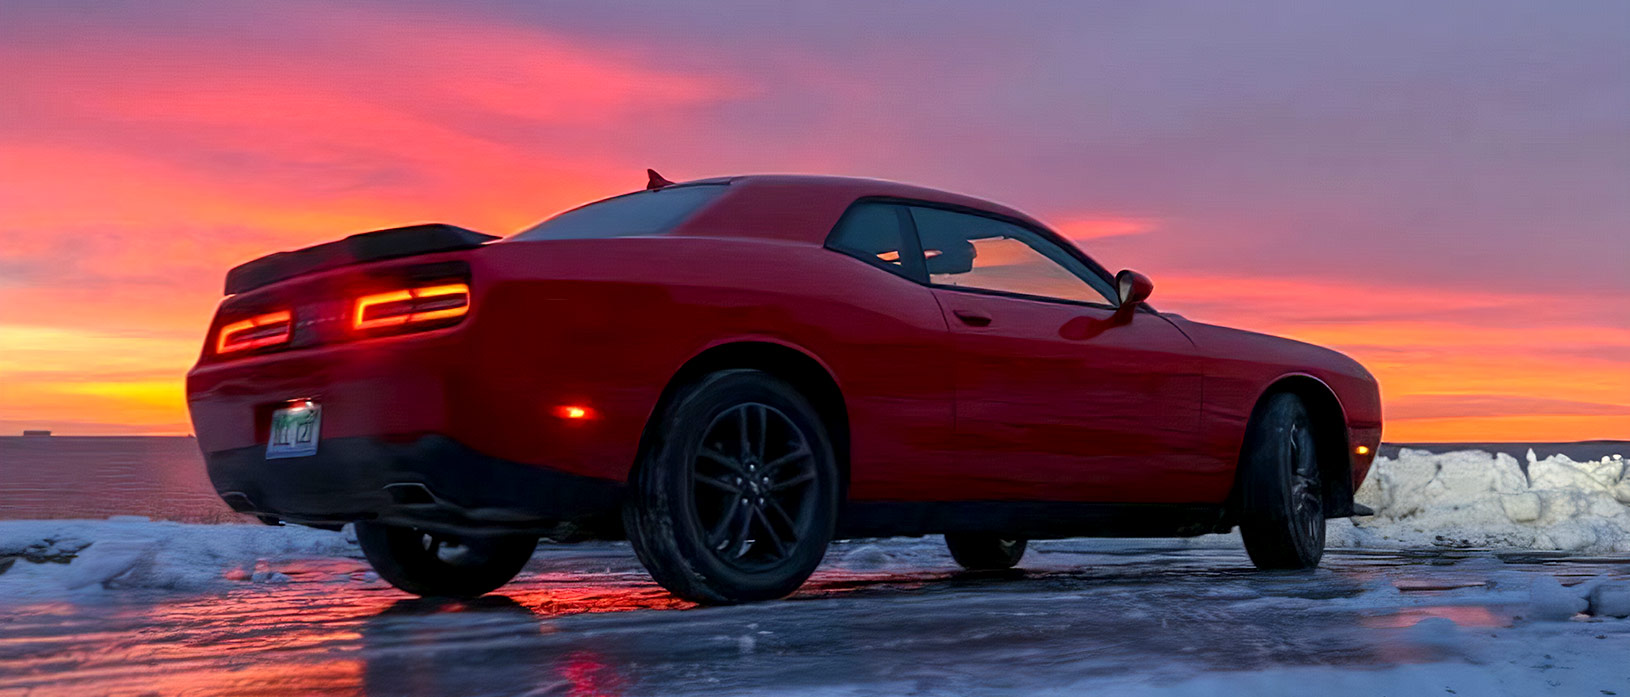 Red Dodge Challenger AWD parked in snow with purple and orange sunset behind